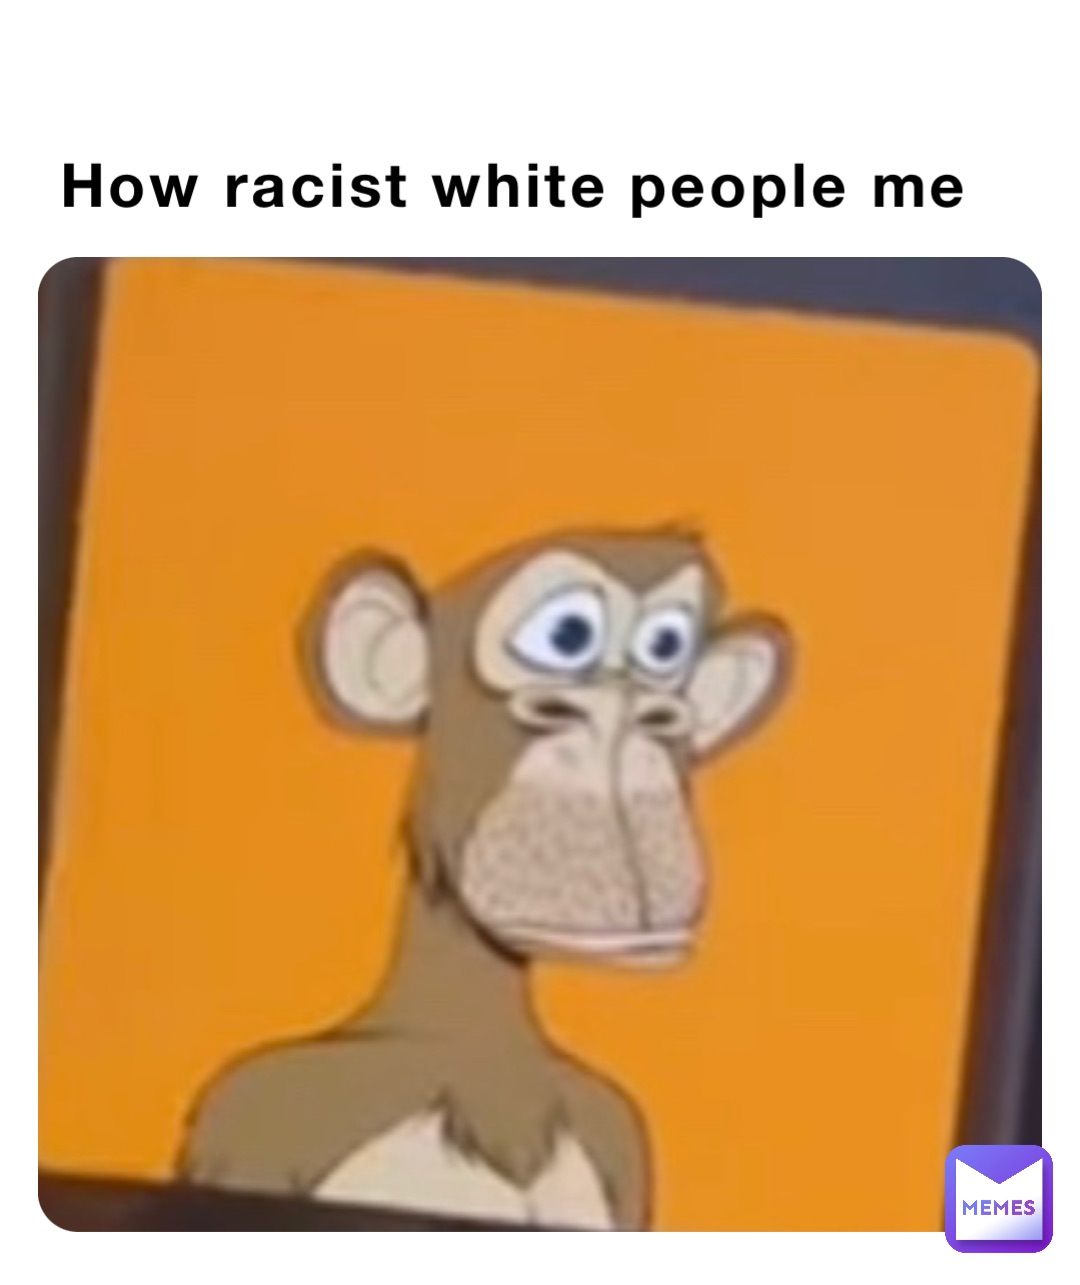 How racist white people me